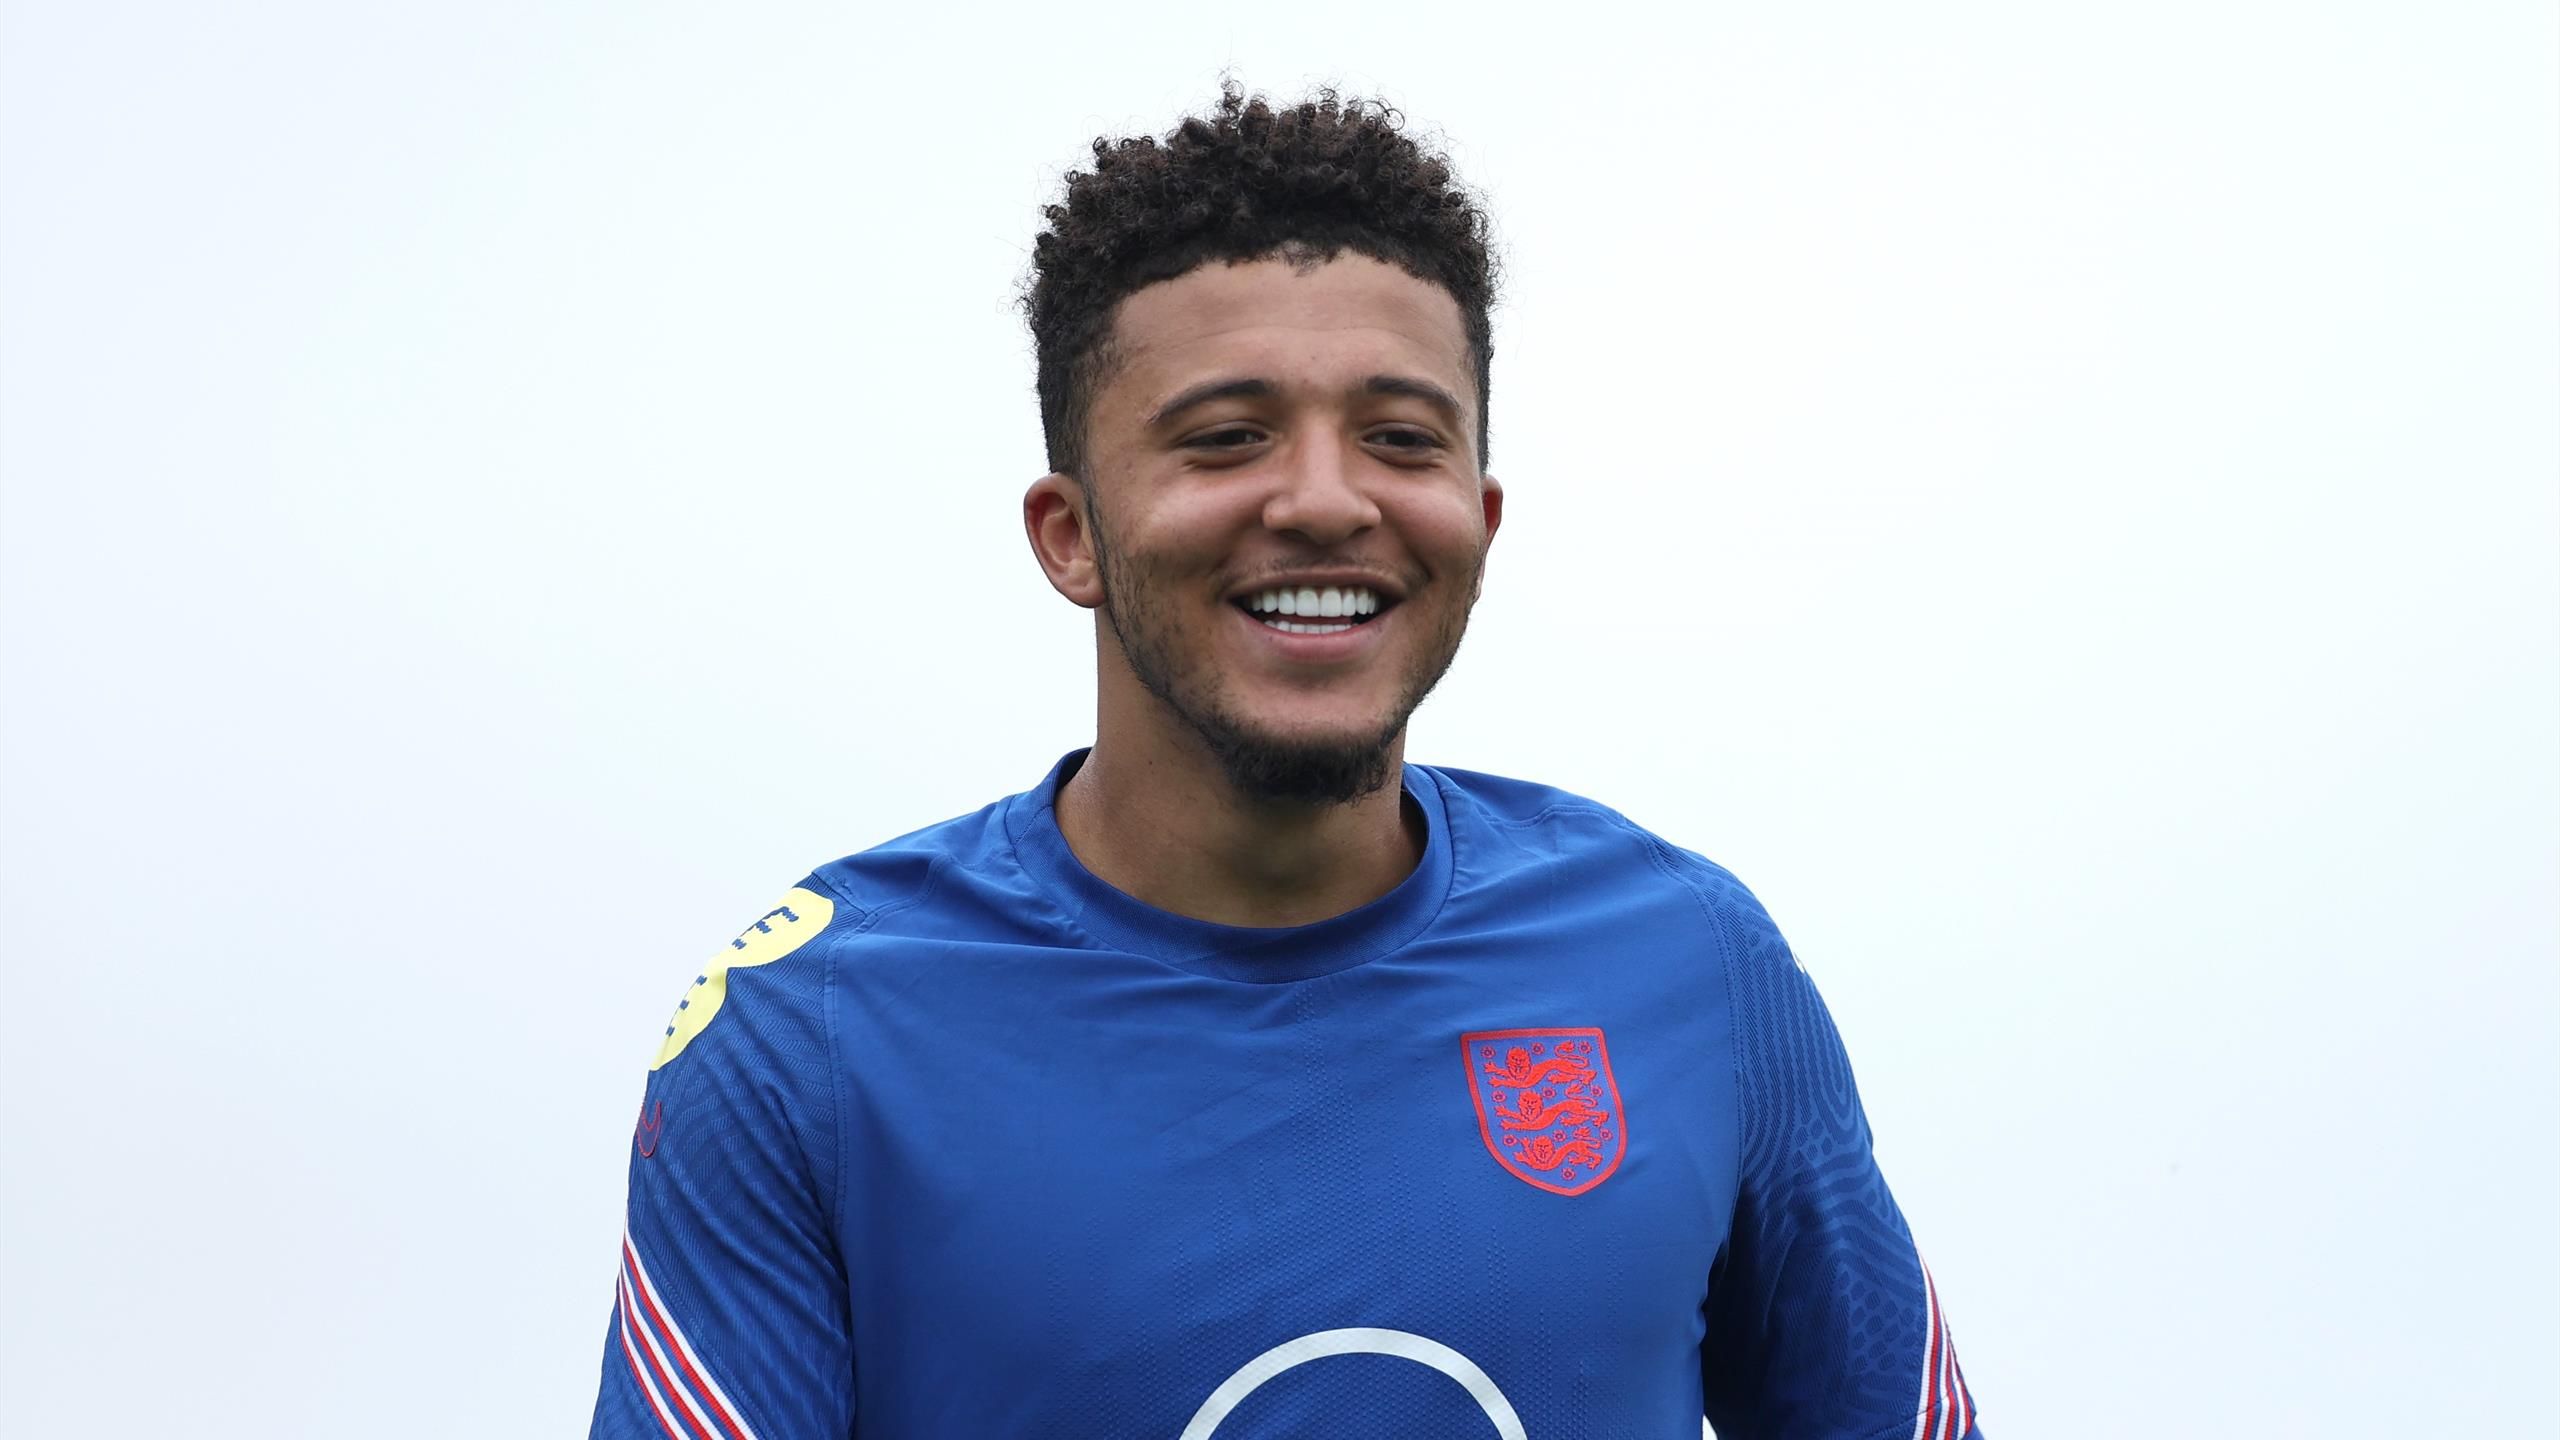 Manchester United confirm that Jadon Sancho will wear the No 25 shirt